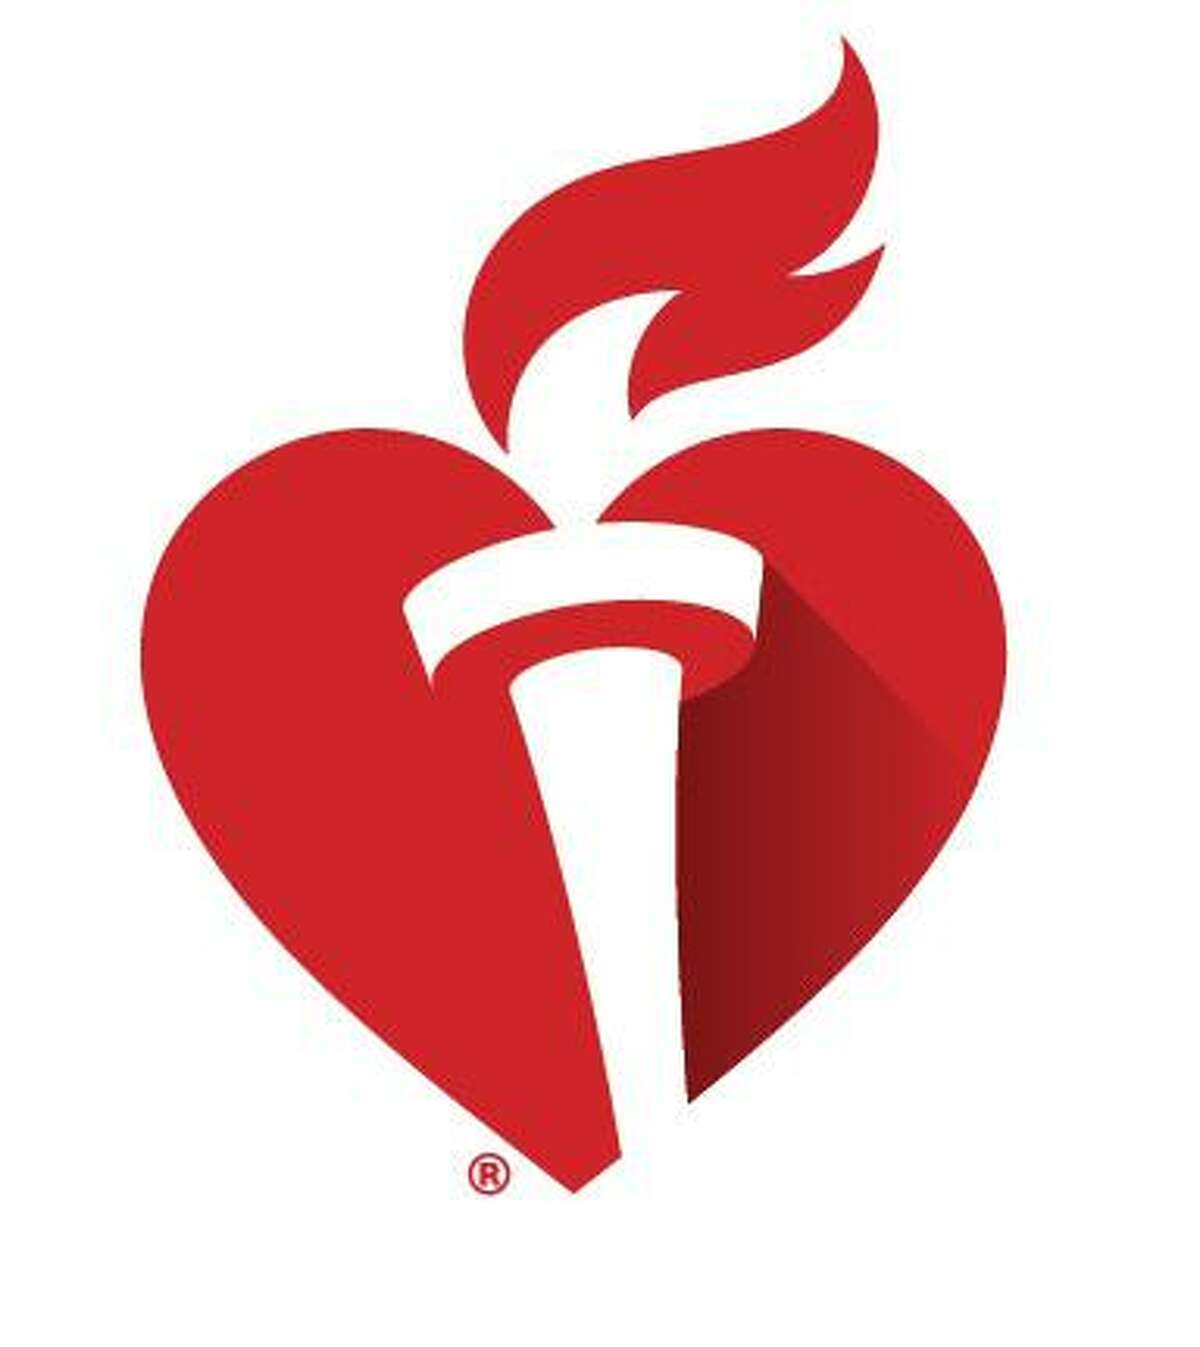 A vocal supporter of the No Surprises Act, the American Heart Association has now turned its focus to educating the public about the new law.